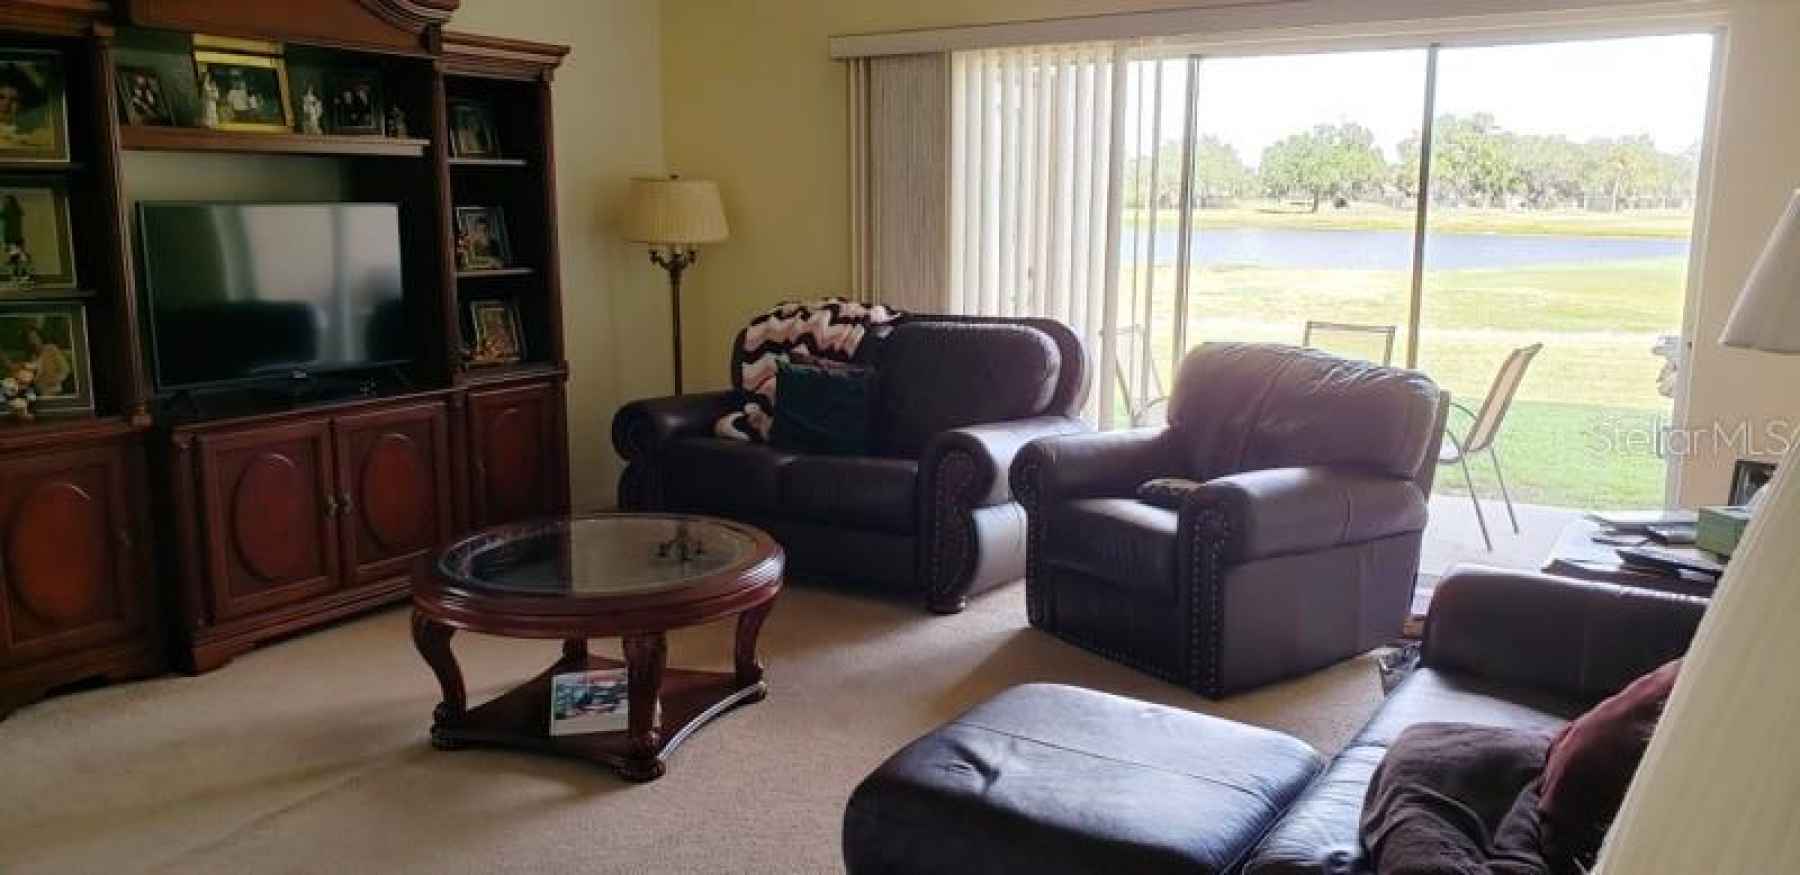 Family room looking out to 16th hole of golf coarse and water view